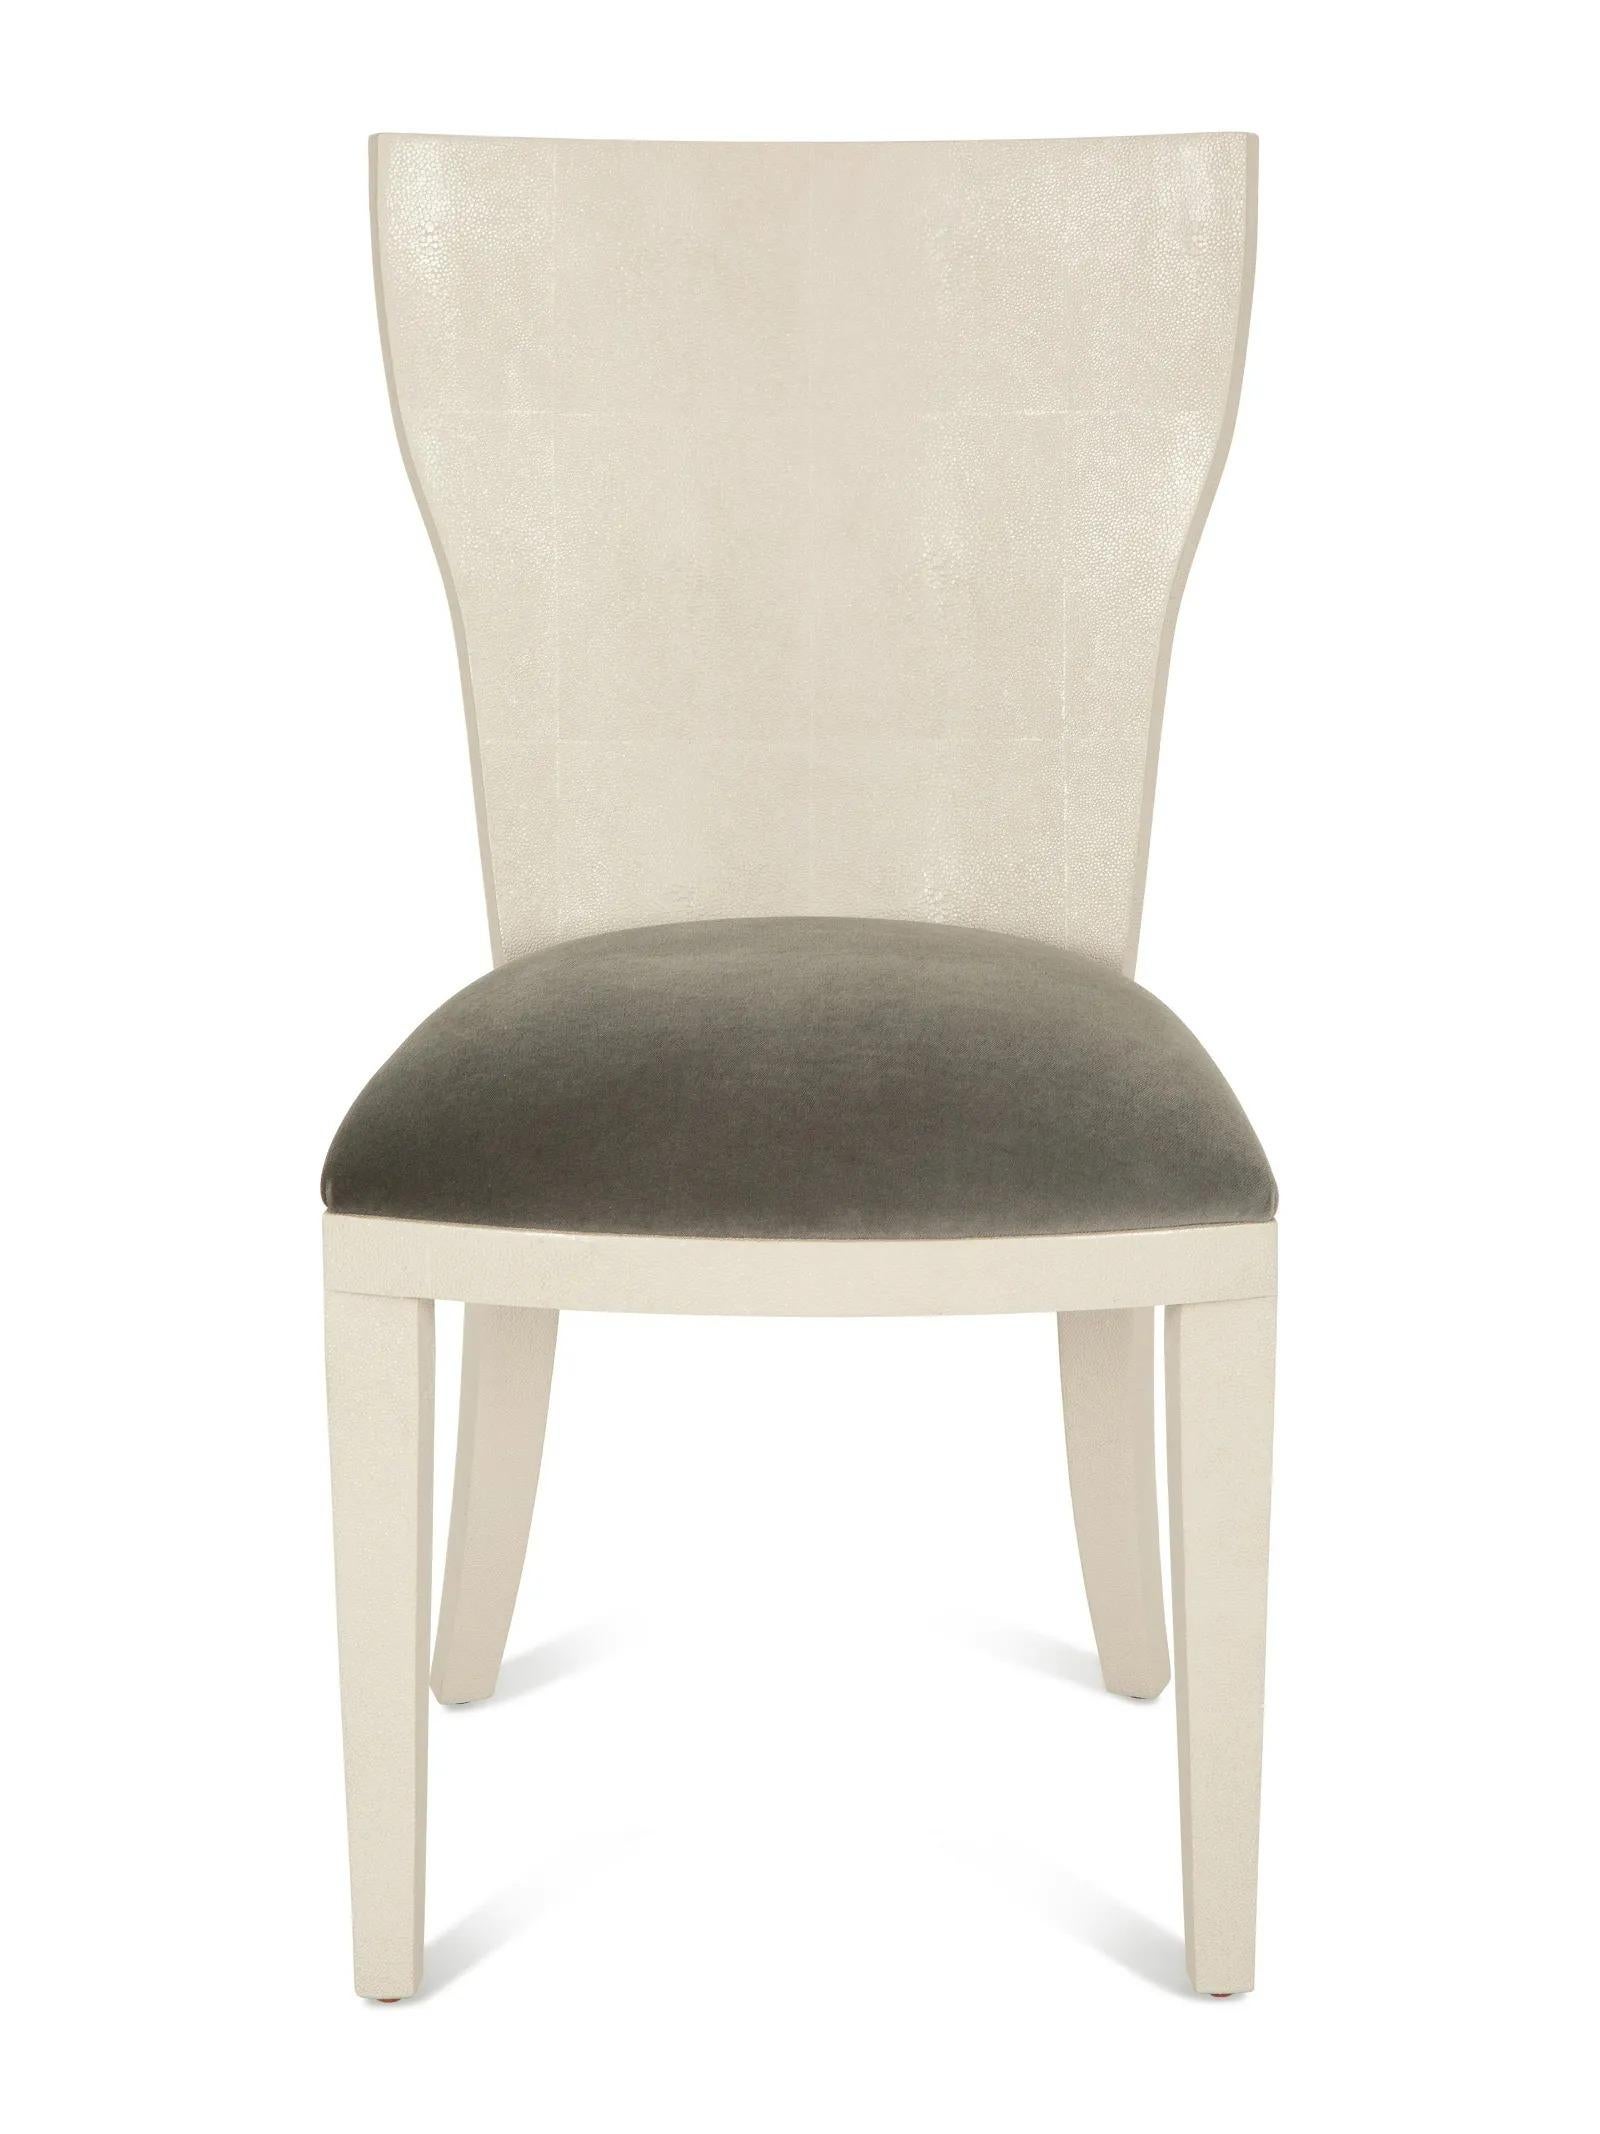 This super chic vintage shagreen side chair with velvet gray seat is a great contemporary addition to any desk or room in your home!